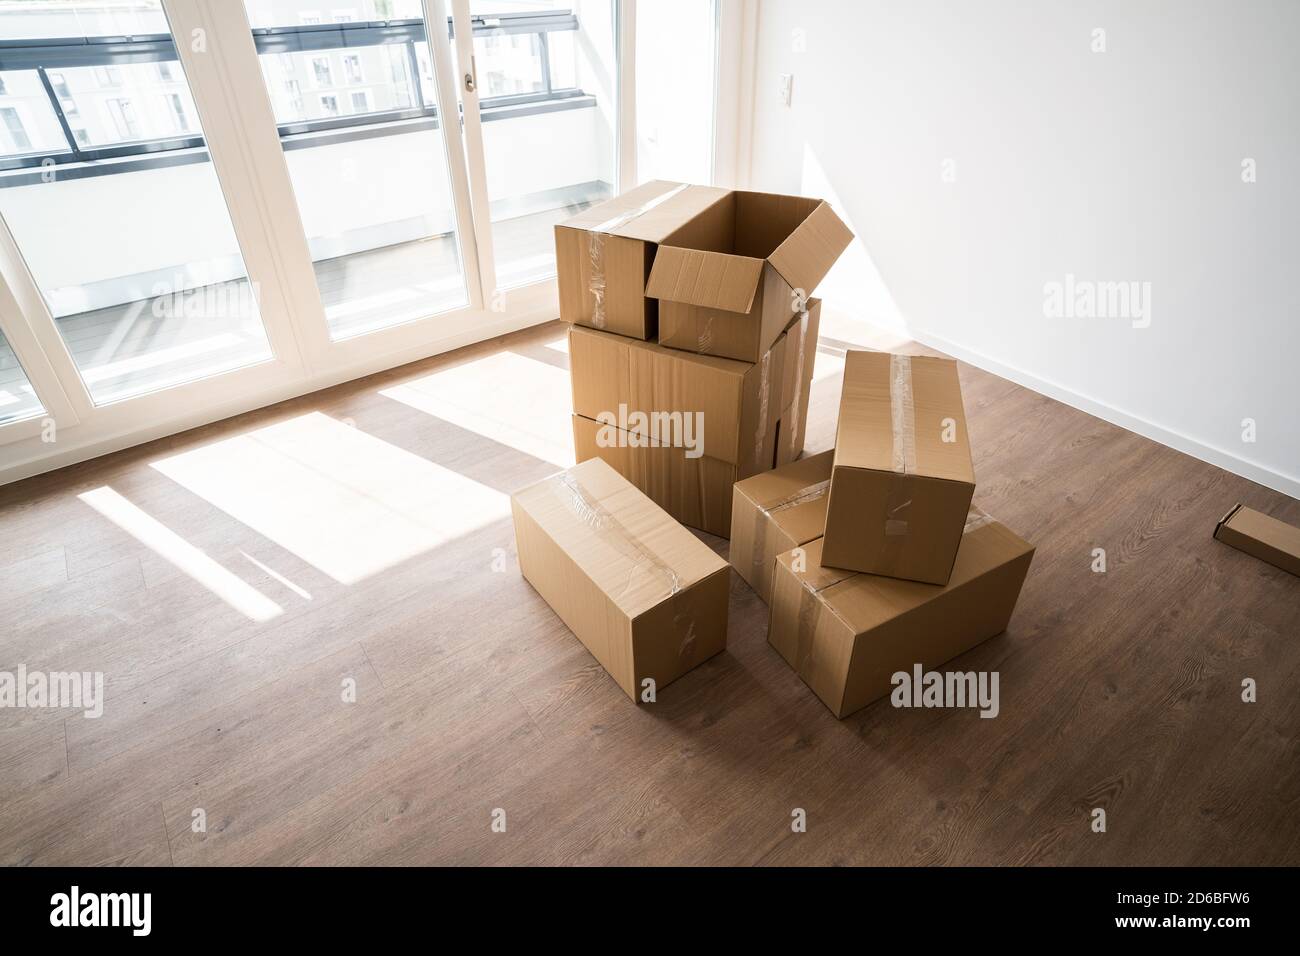 Empty Room With Moving Boxes Or Cartons Stock Photo